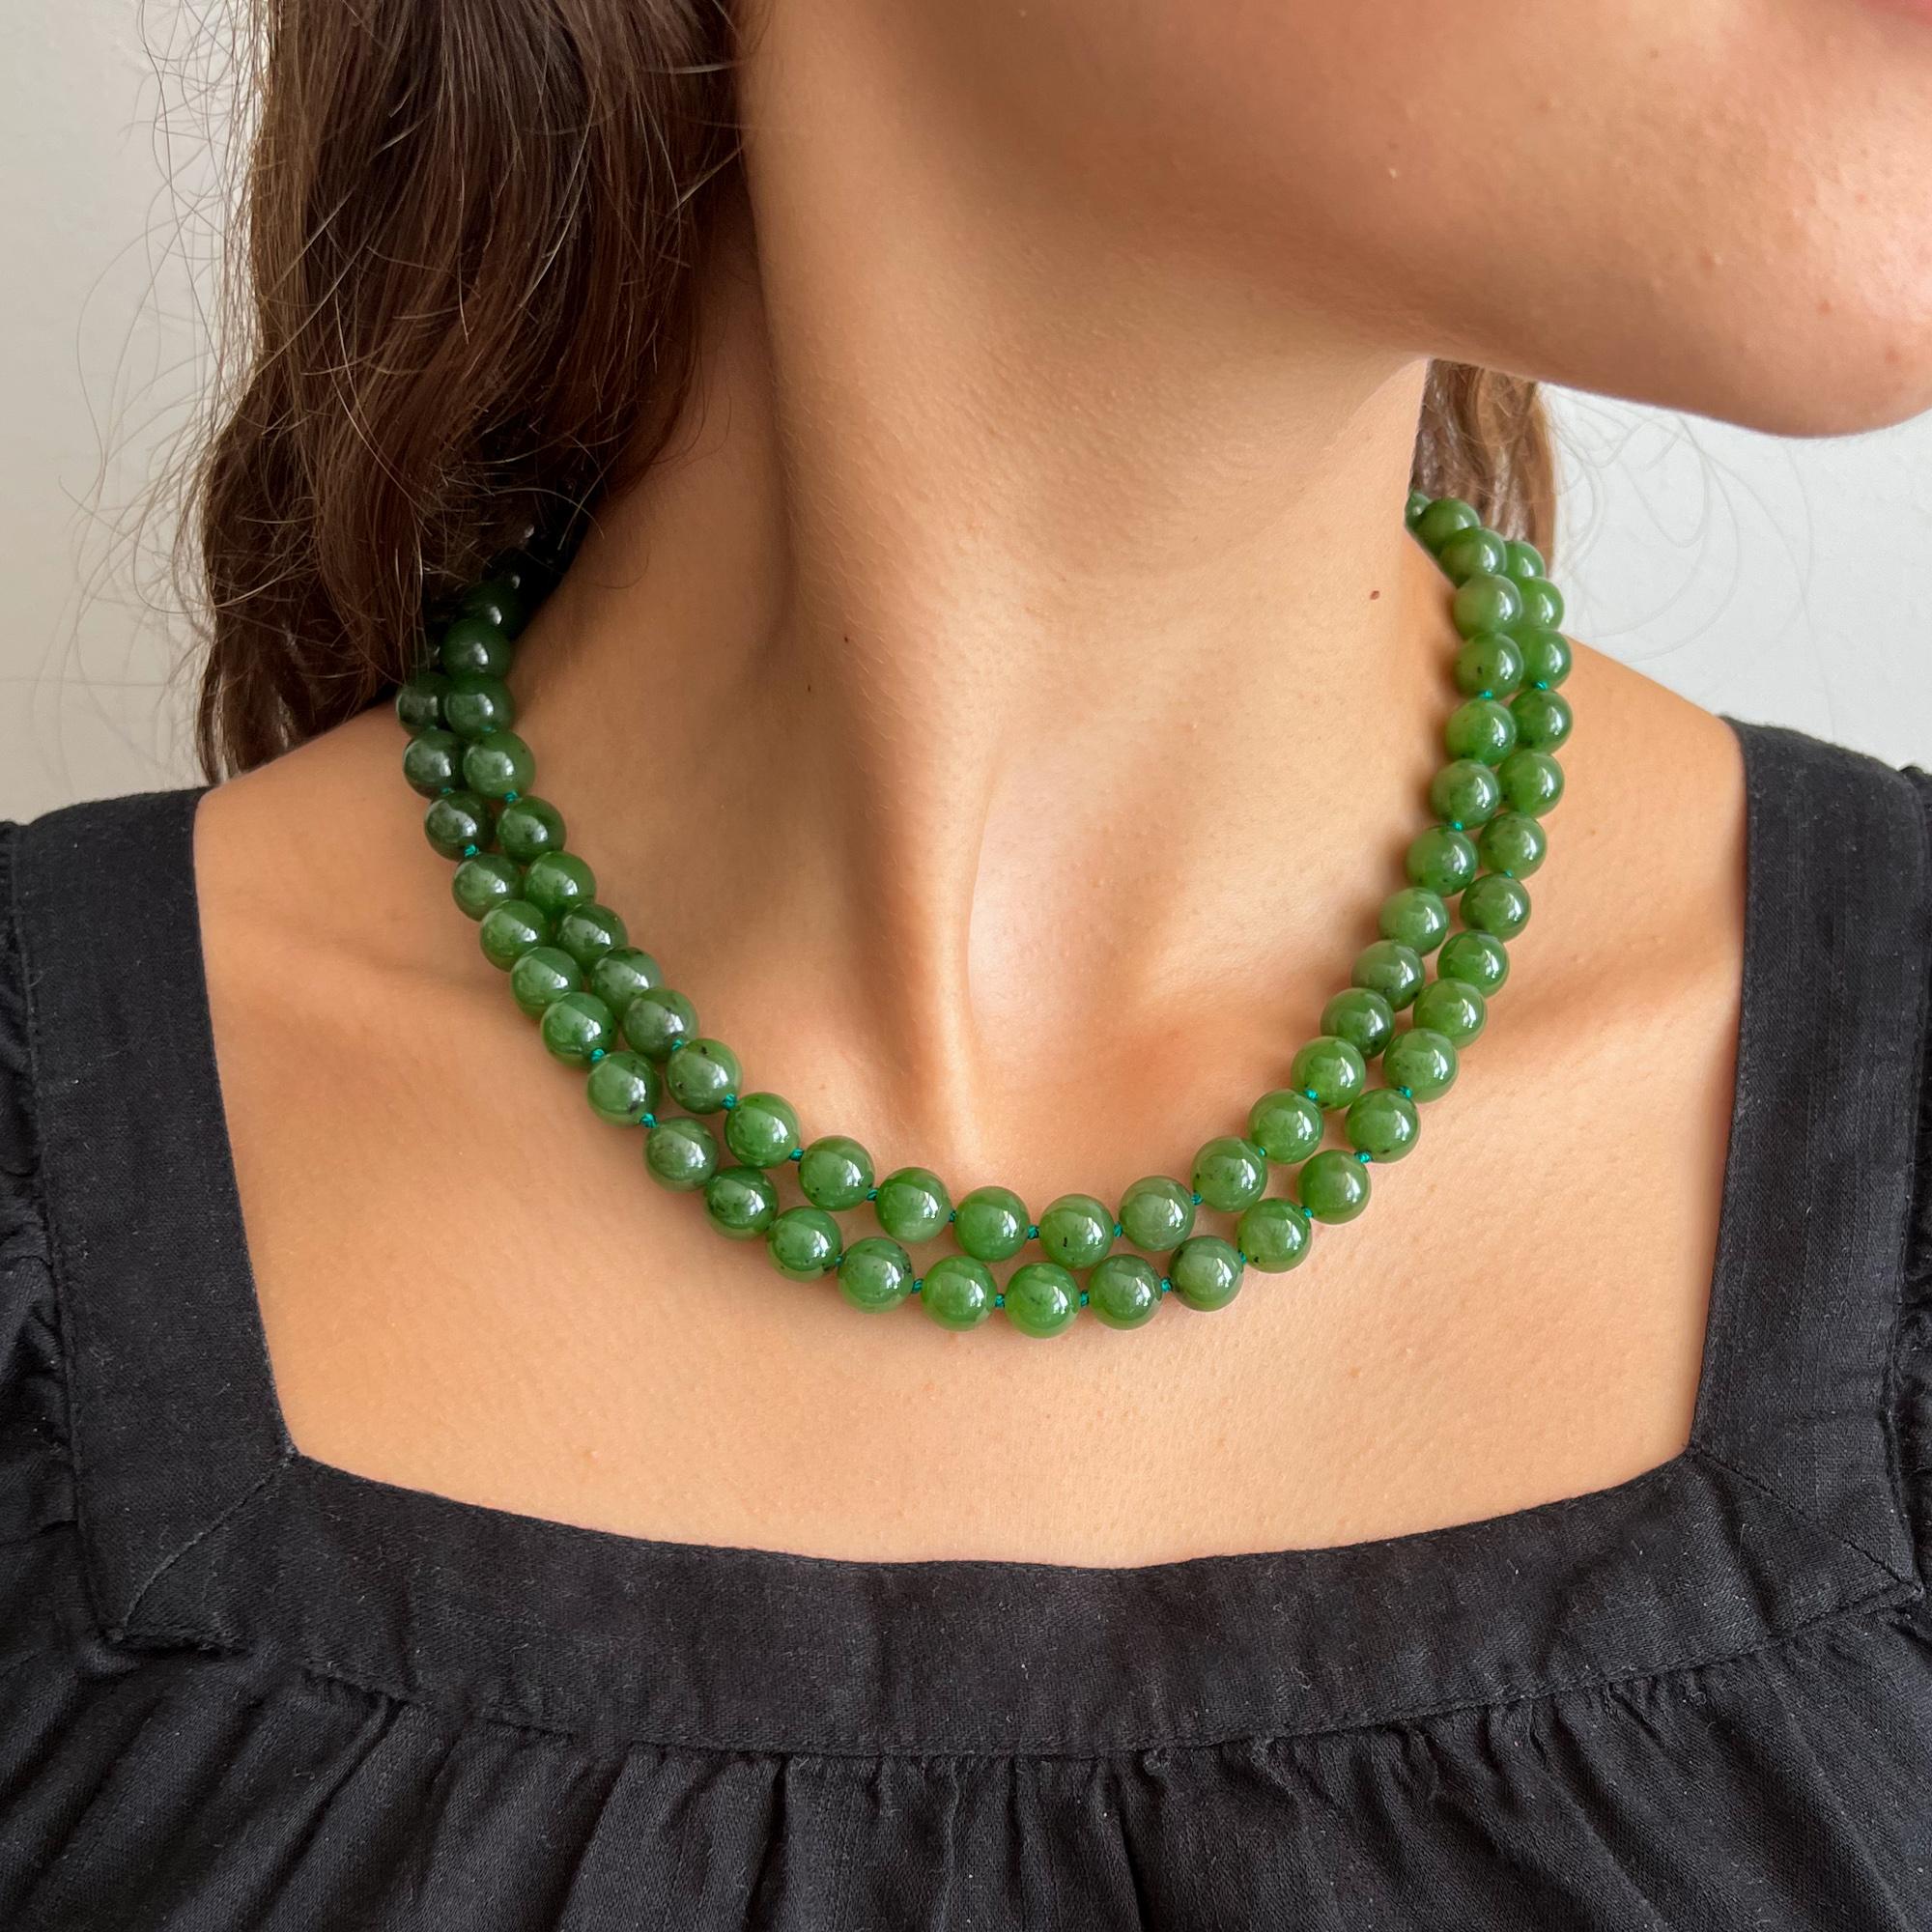 This dark green two-strand nephrite jade necklace is from Early 20th century. The necklace consists of 78 nephrite mottled jade stones. The jade strands are strung with these beautiful round beads, and to keep some nice space between the beads, the